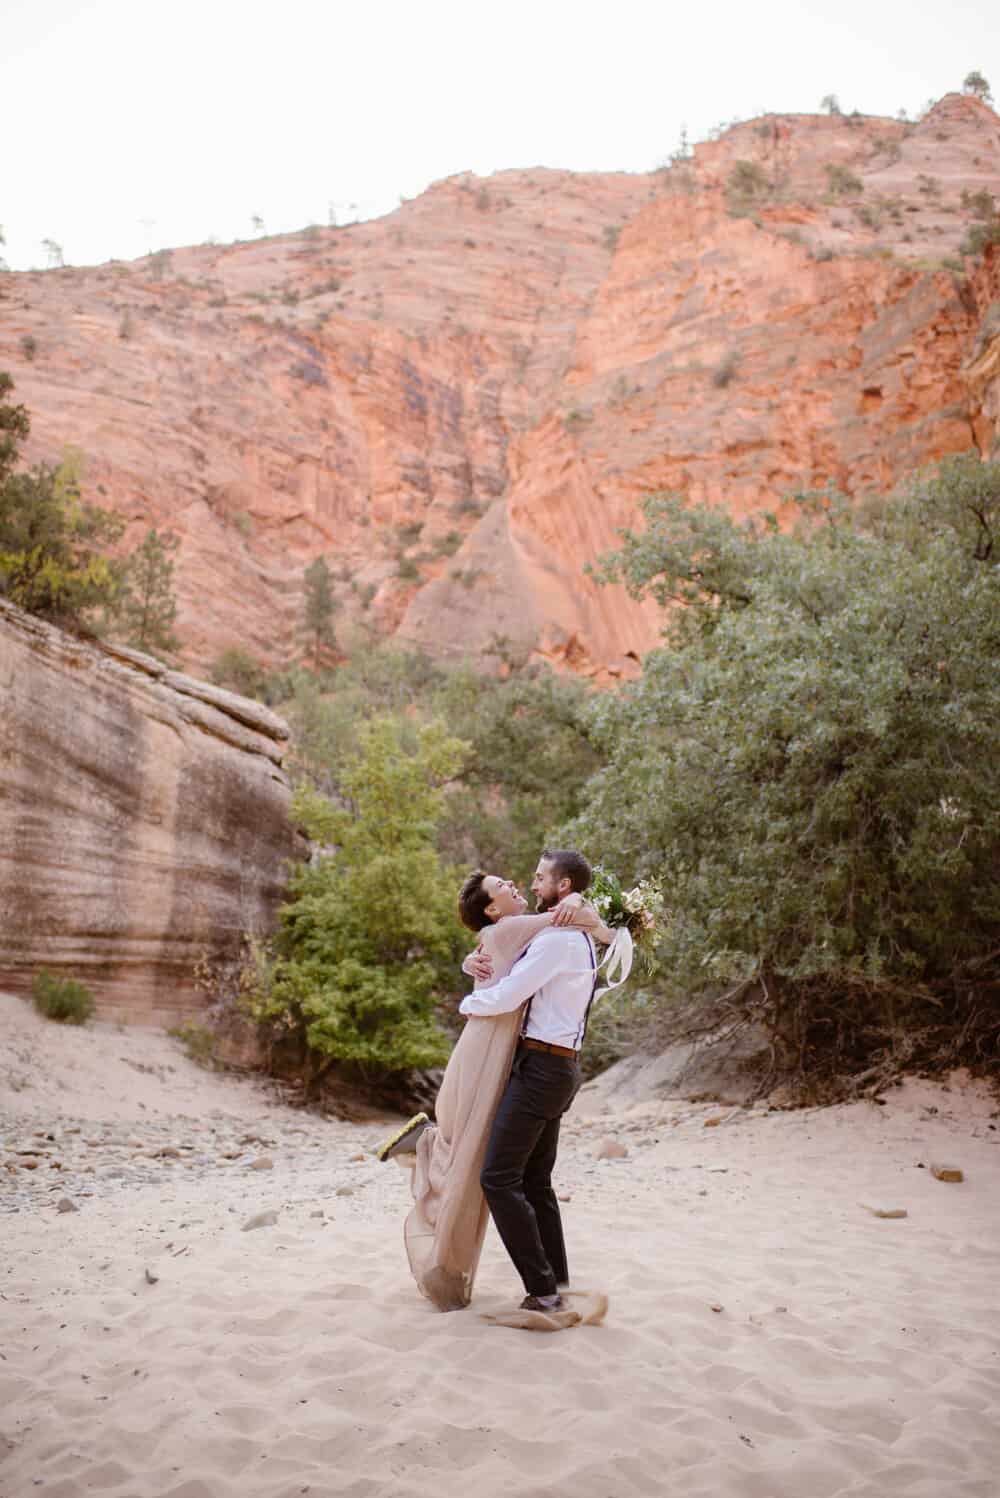 The bride and groom hug each other while smiling and laughing while playing near a slot canyon in Zion National Park.